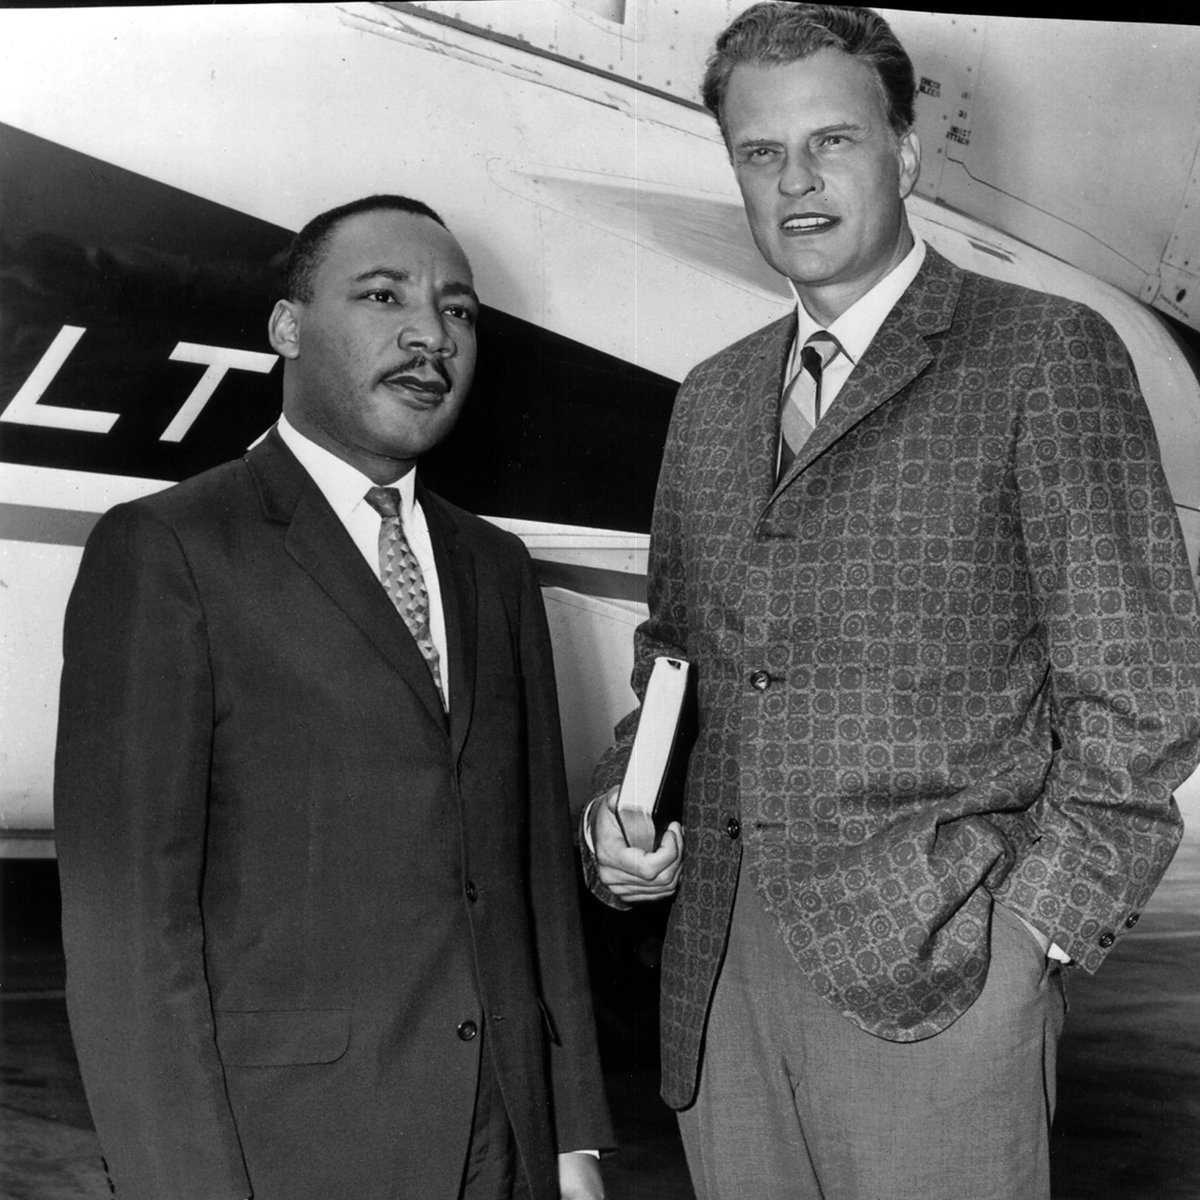 @Franklin_Graham's photo on Martin Luther King